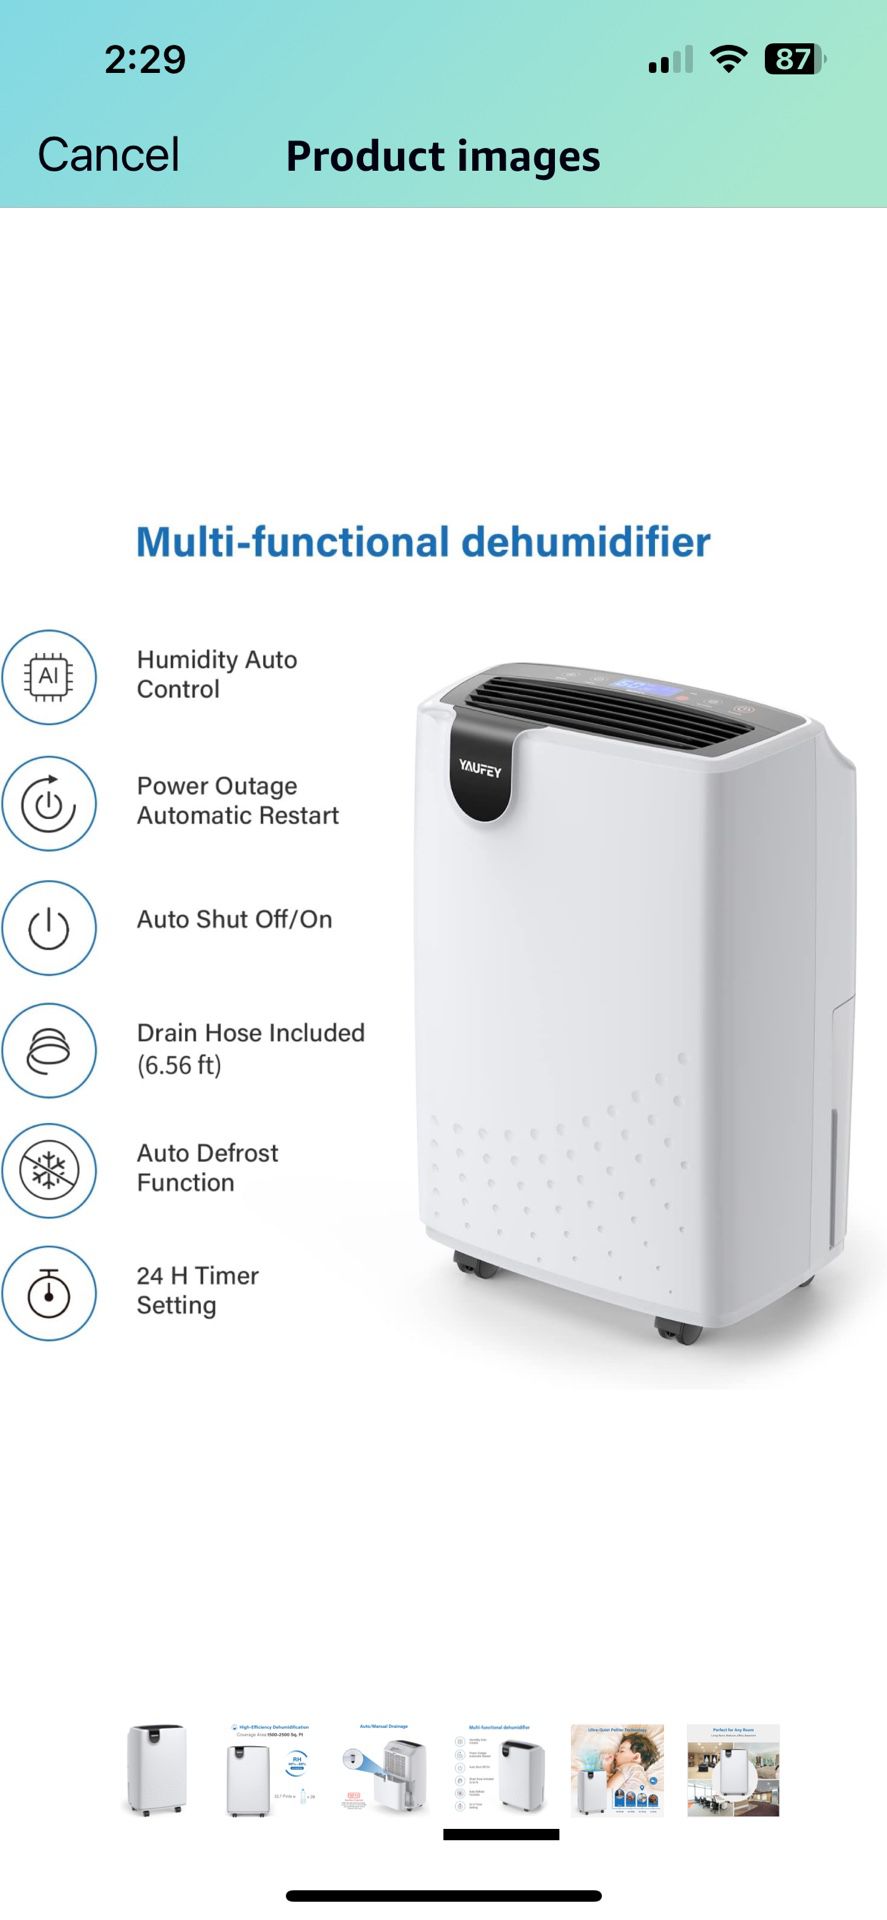 2500 Sq. Ft Home Dehumidifier for Medium to Large Rooms and Basements with Auto or Manual Drainage, 0.48 Gallon Water Tank Capacity - Low Noisemaker 